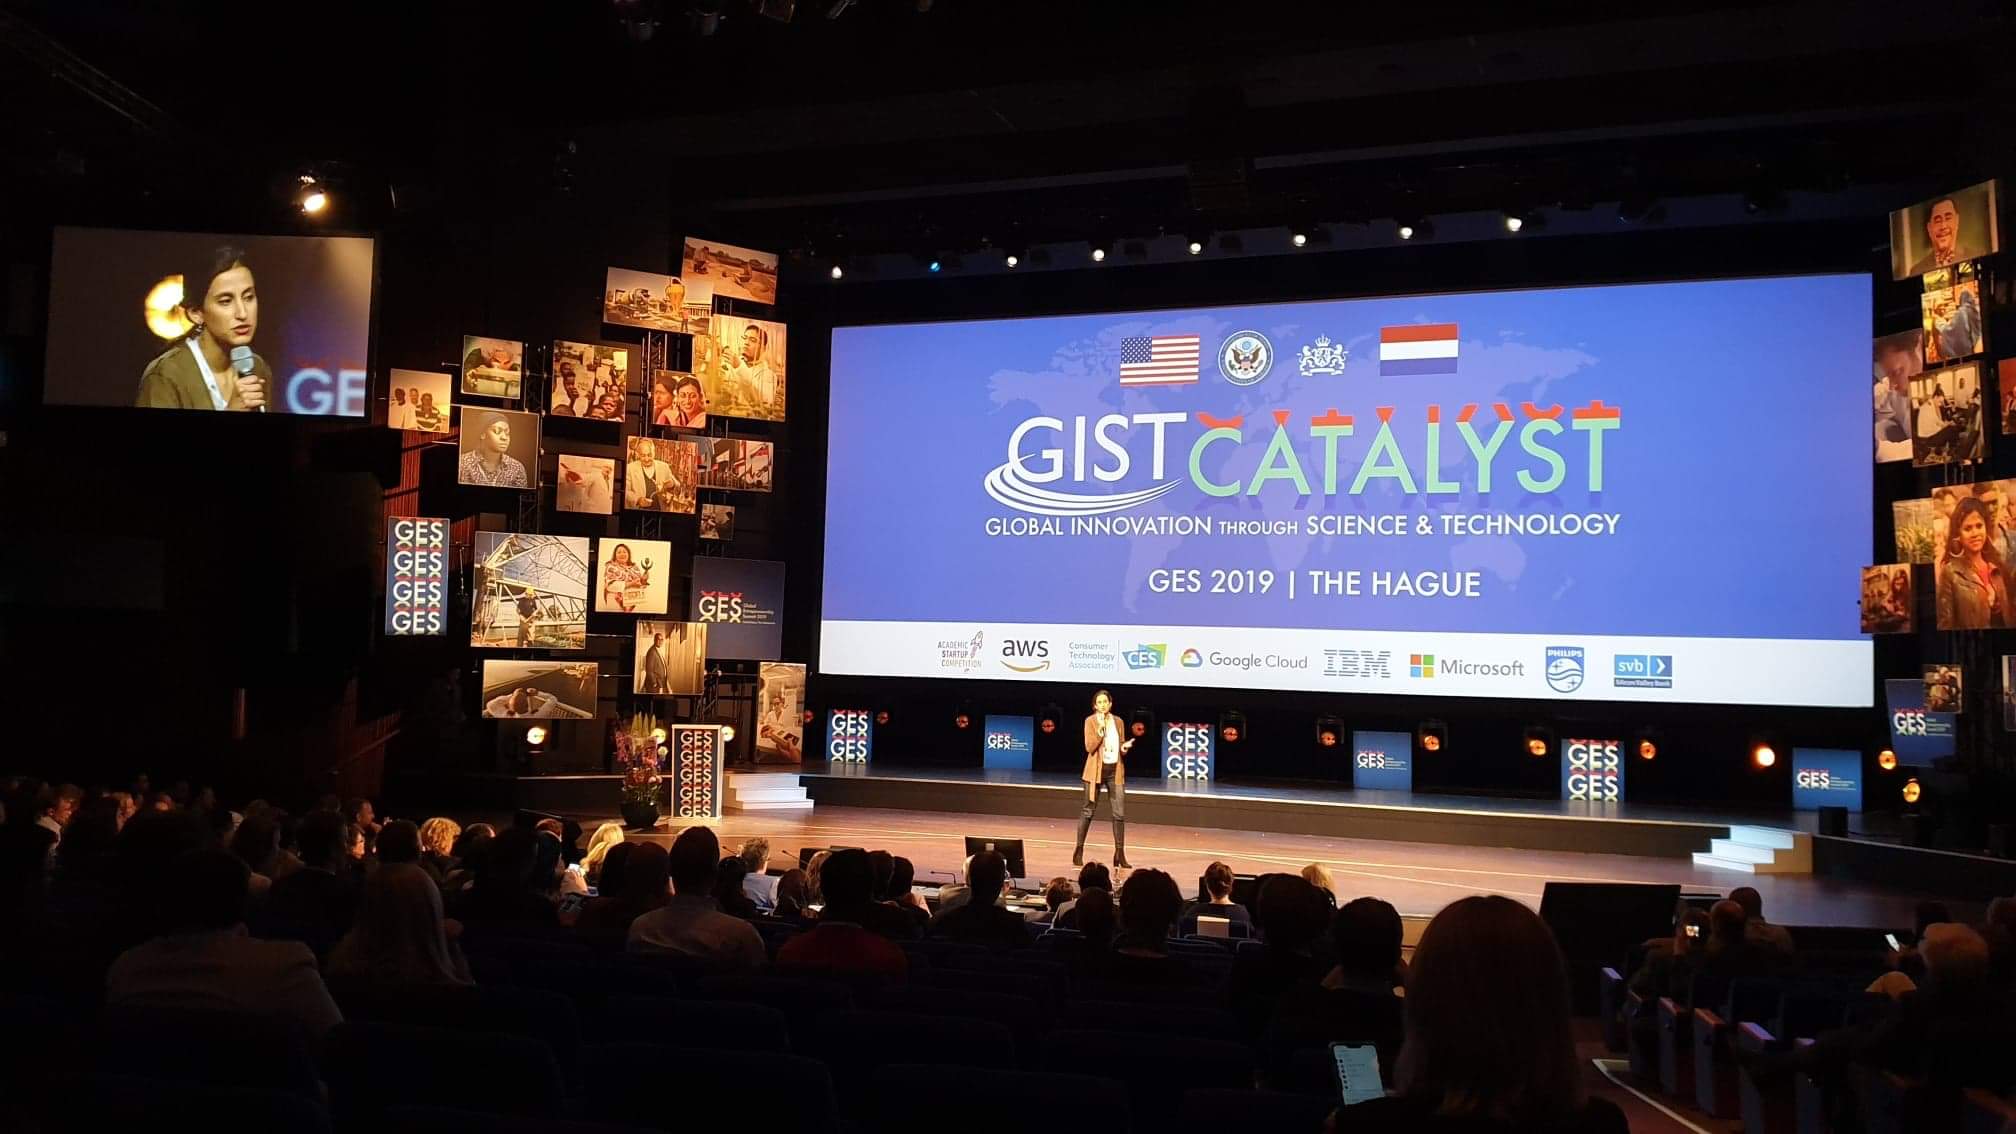 Gist catalyst 2019 Clio Muse Tours